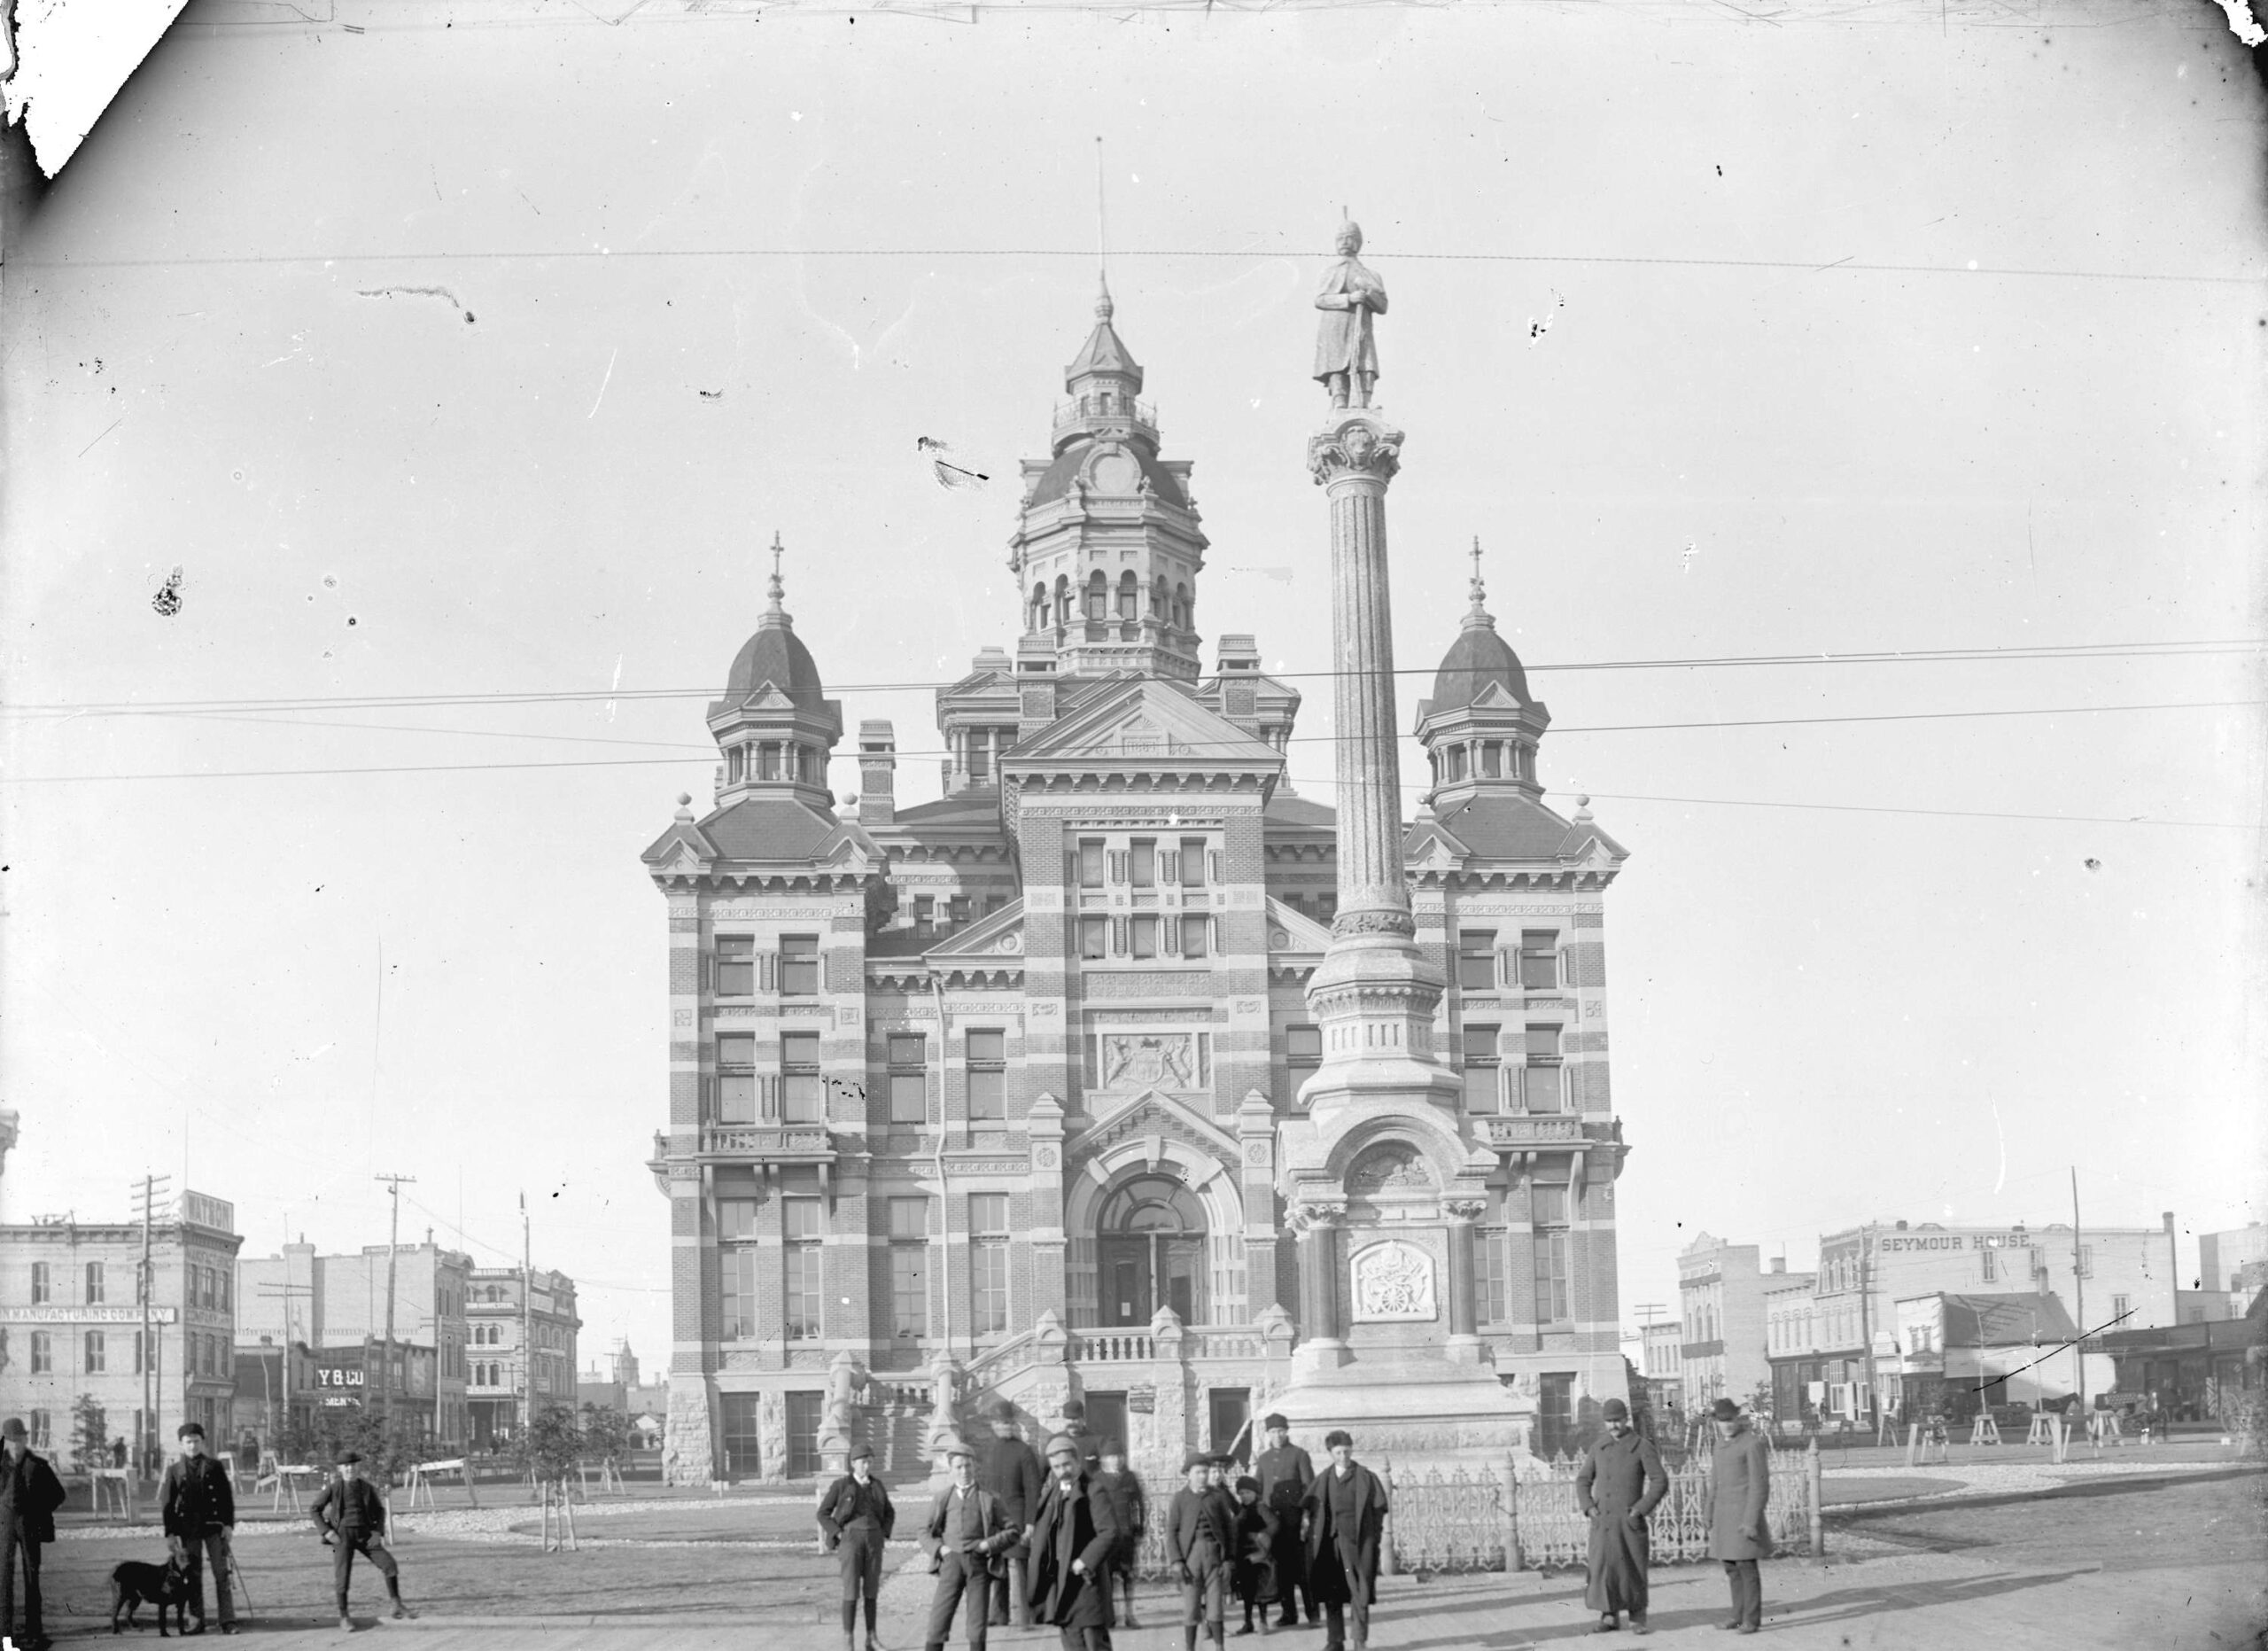 A black and white photograph of a square Victorian building with towers and turrets. A few people are grouped in the foreground, near a statue on a tall pillar.